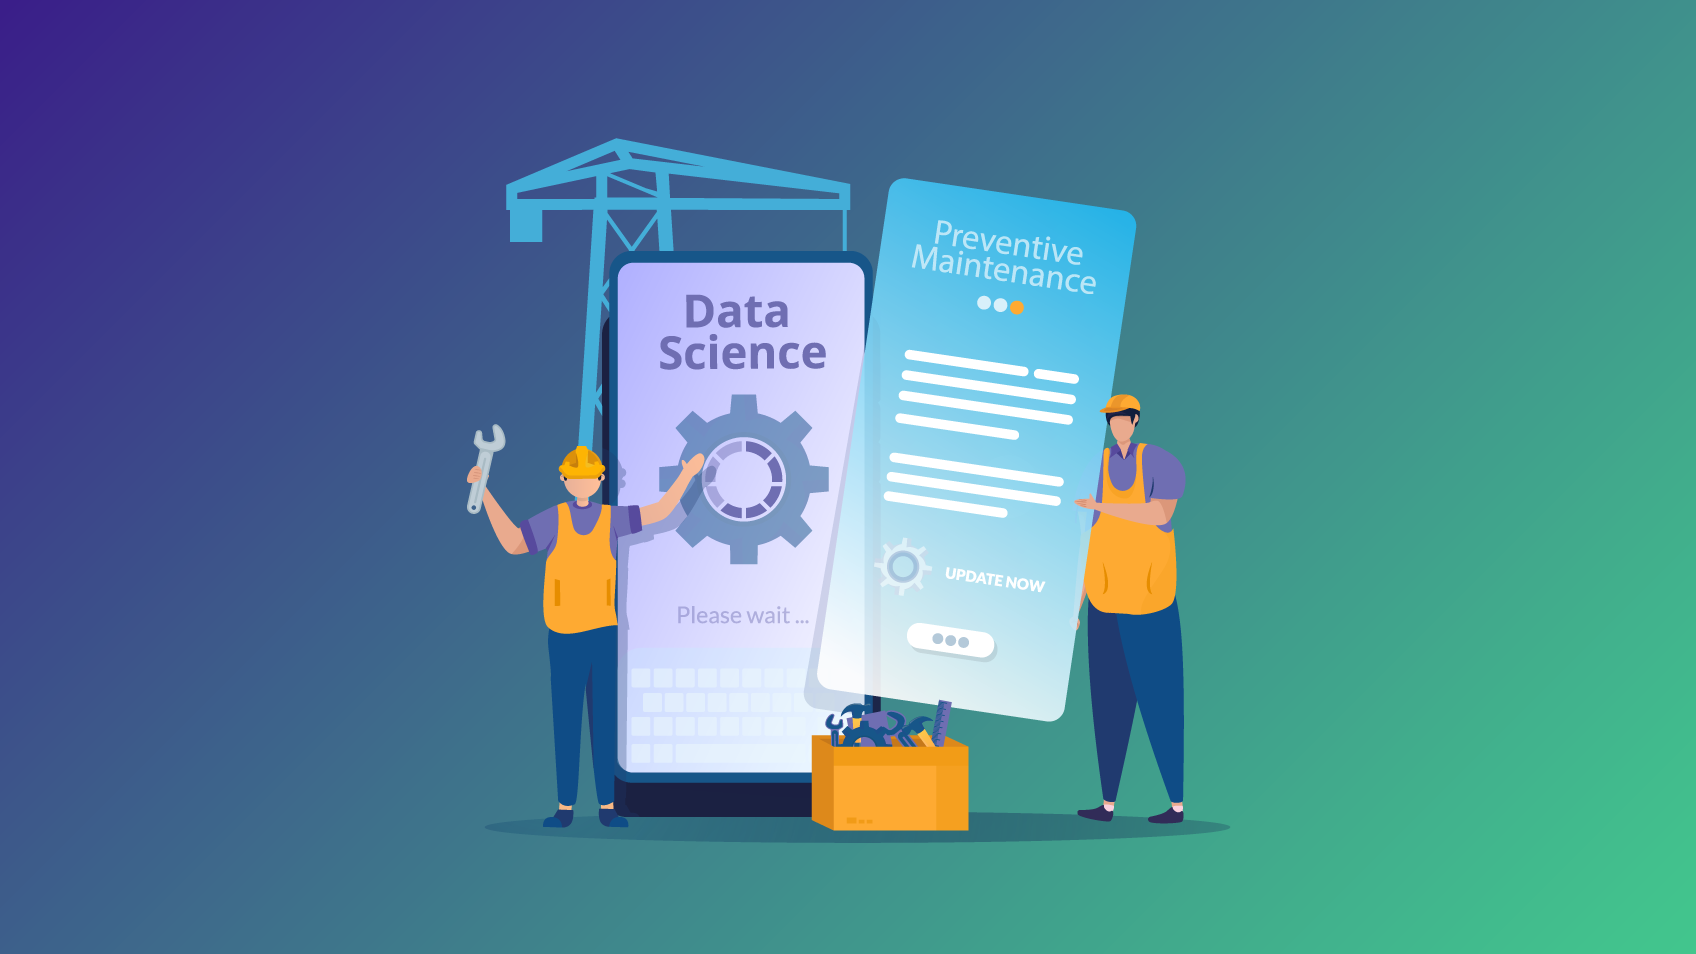 Data Science and preventive maintenance: prevention is key!